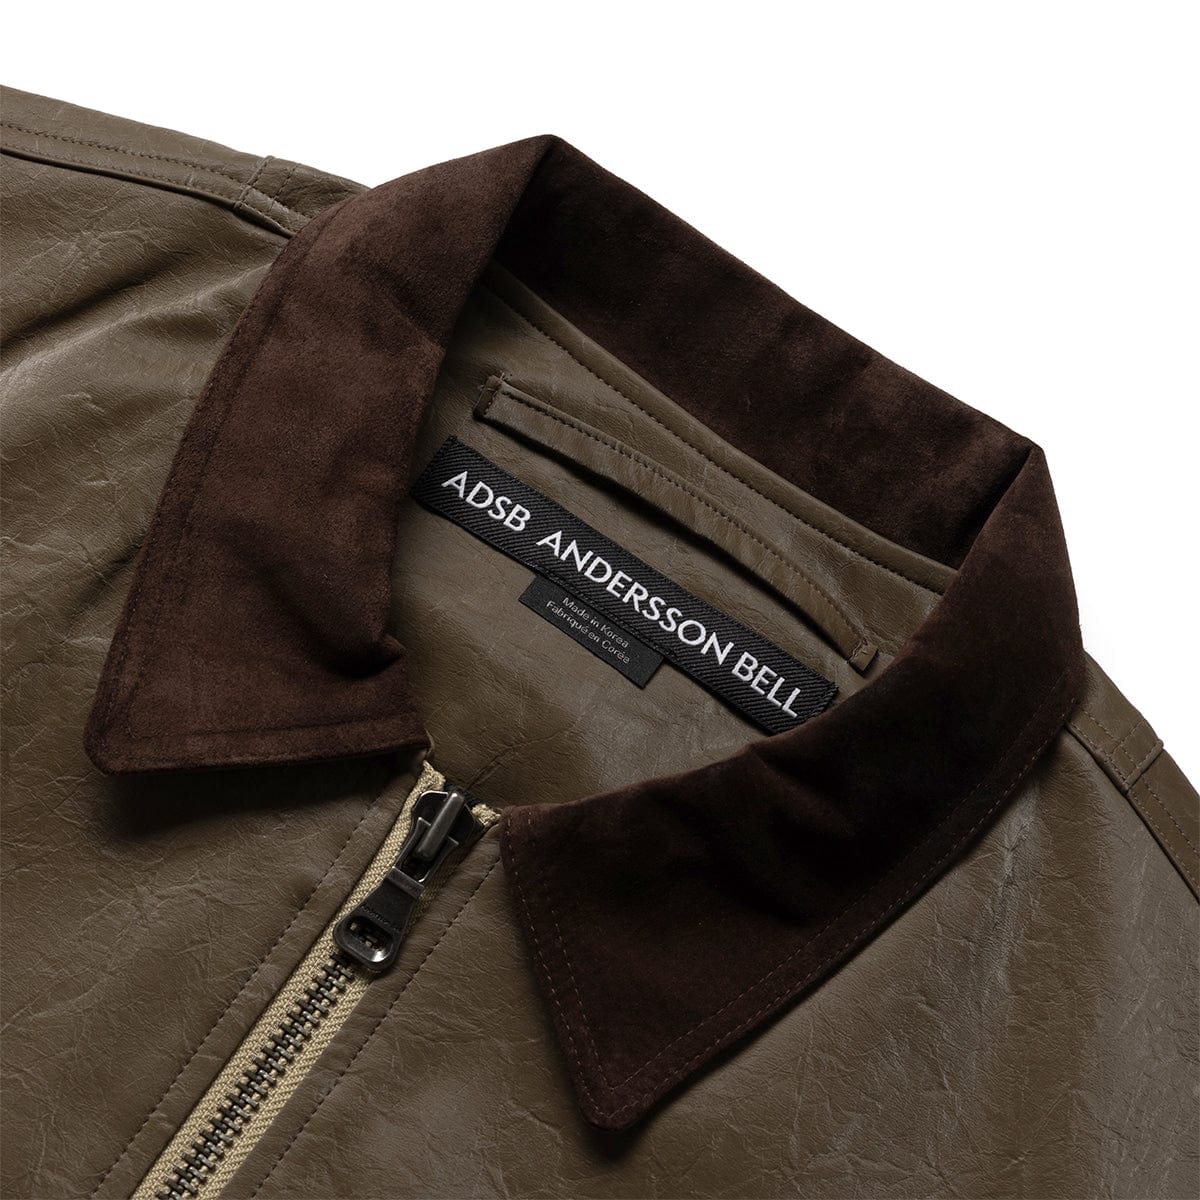 Andersson Bell Outerwear NEW ORTEGA23 BOMBER JACKET